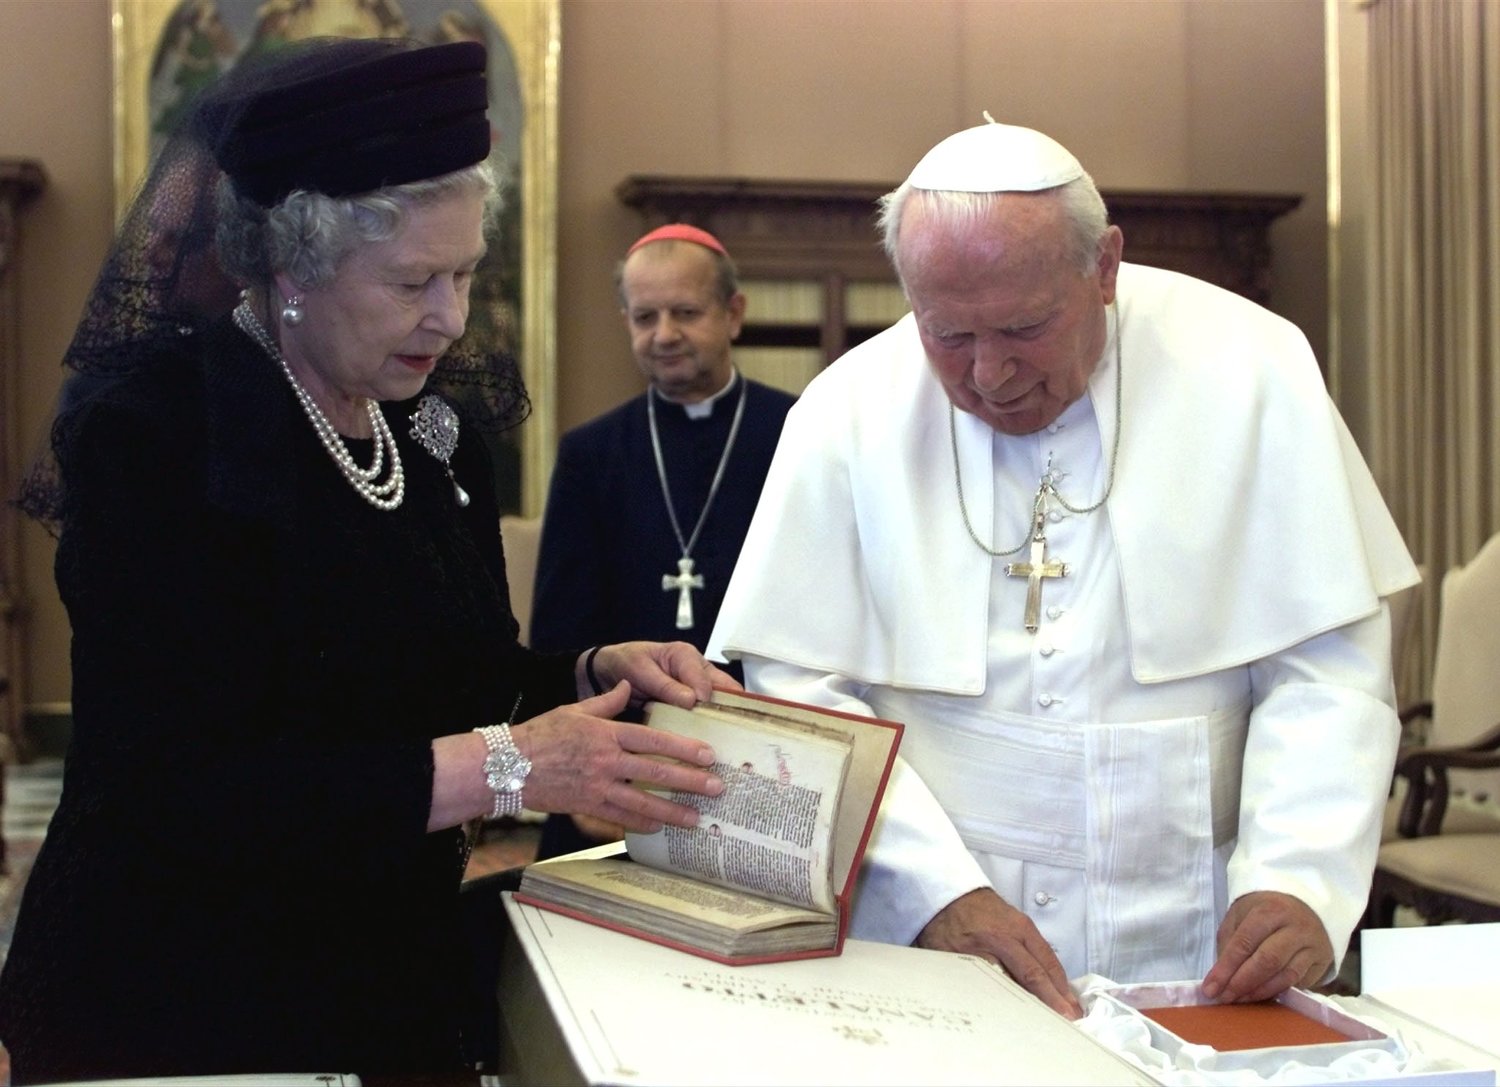 Pope John Paul II exchanges gifts with Britain’s Queen Elizabeth II during their private audience at the Vatican Oct. 17, 2000.